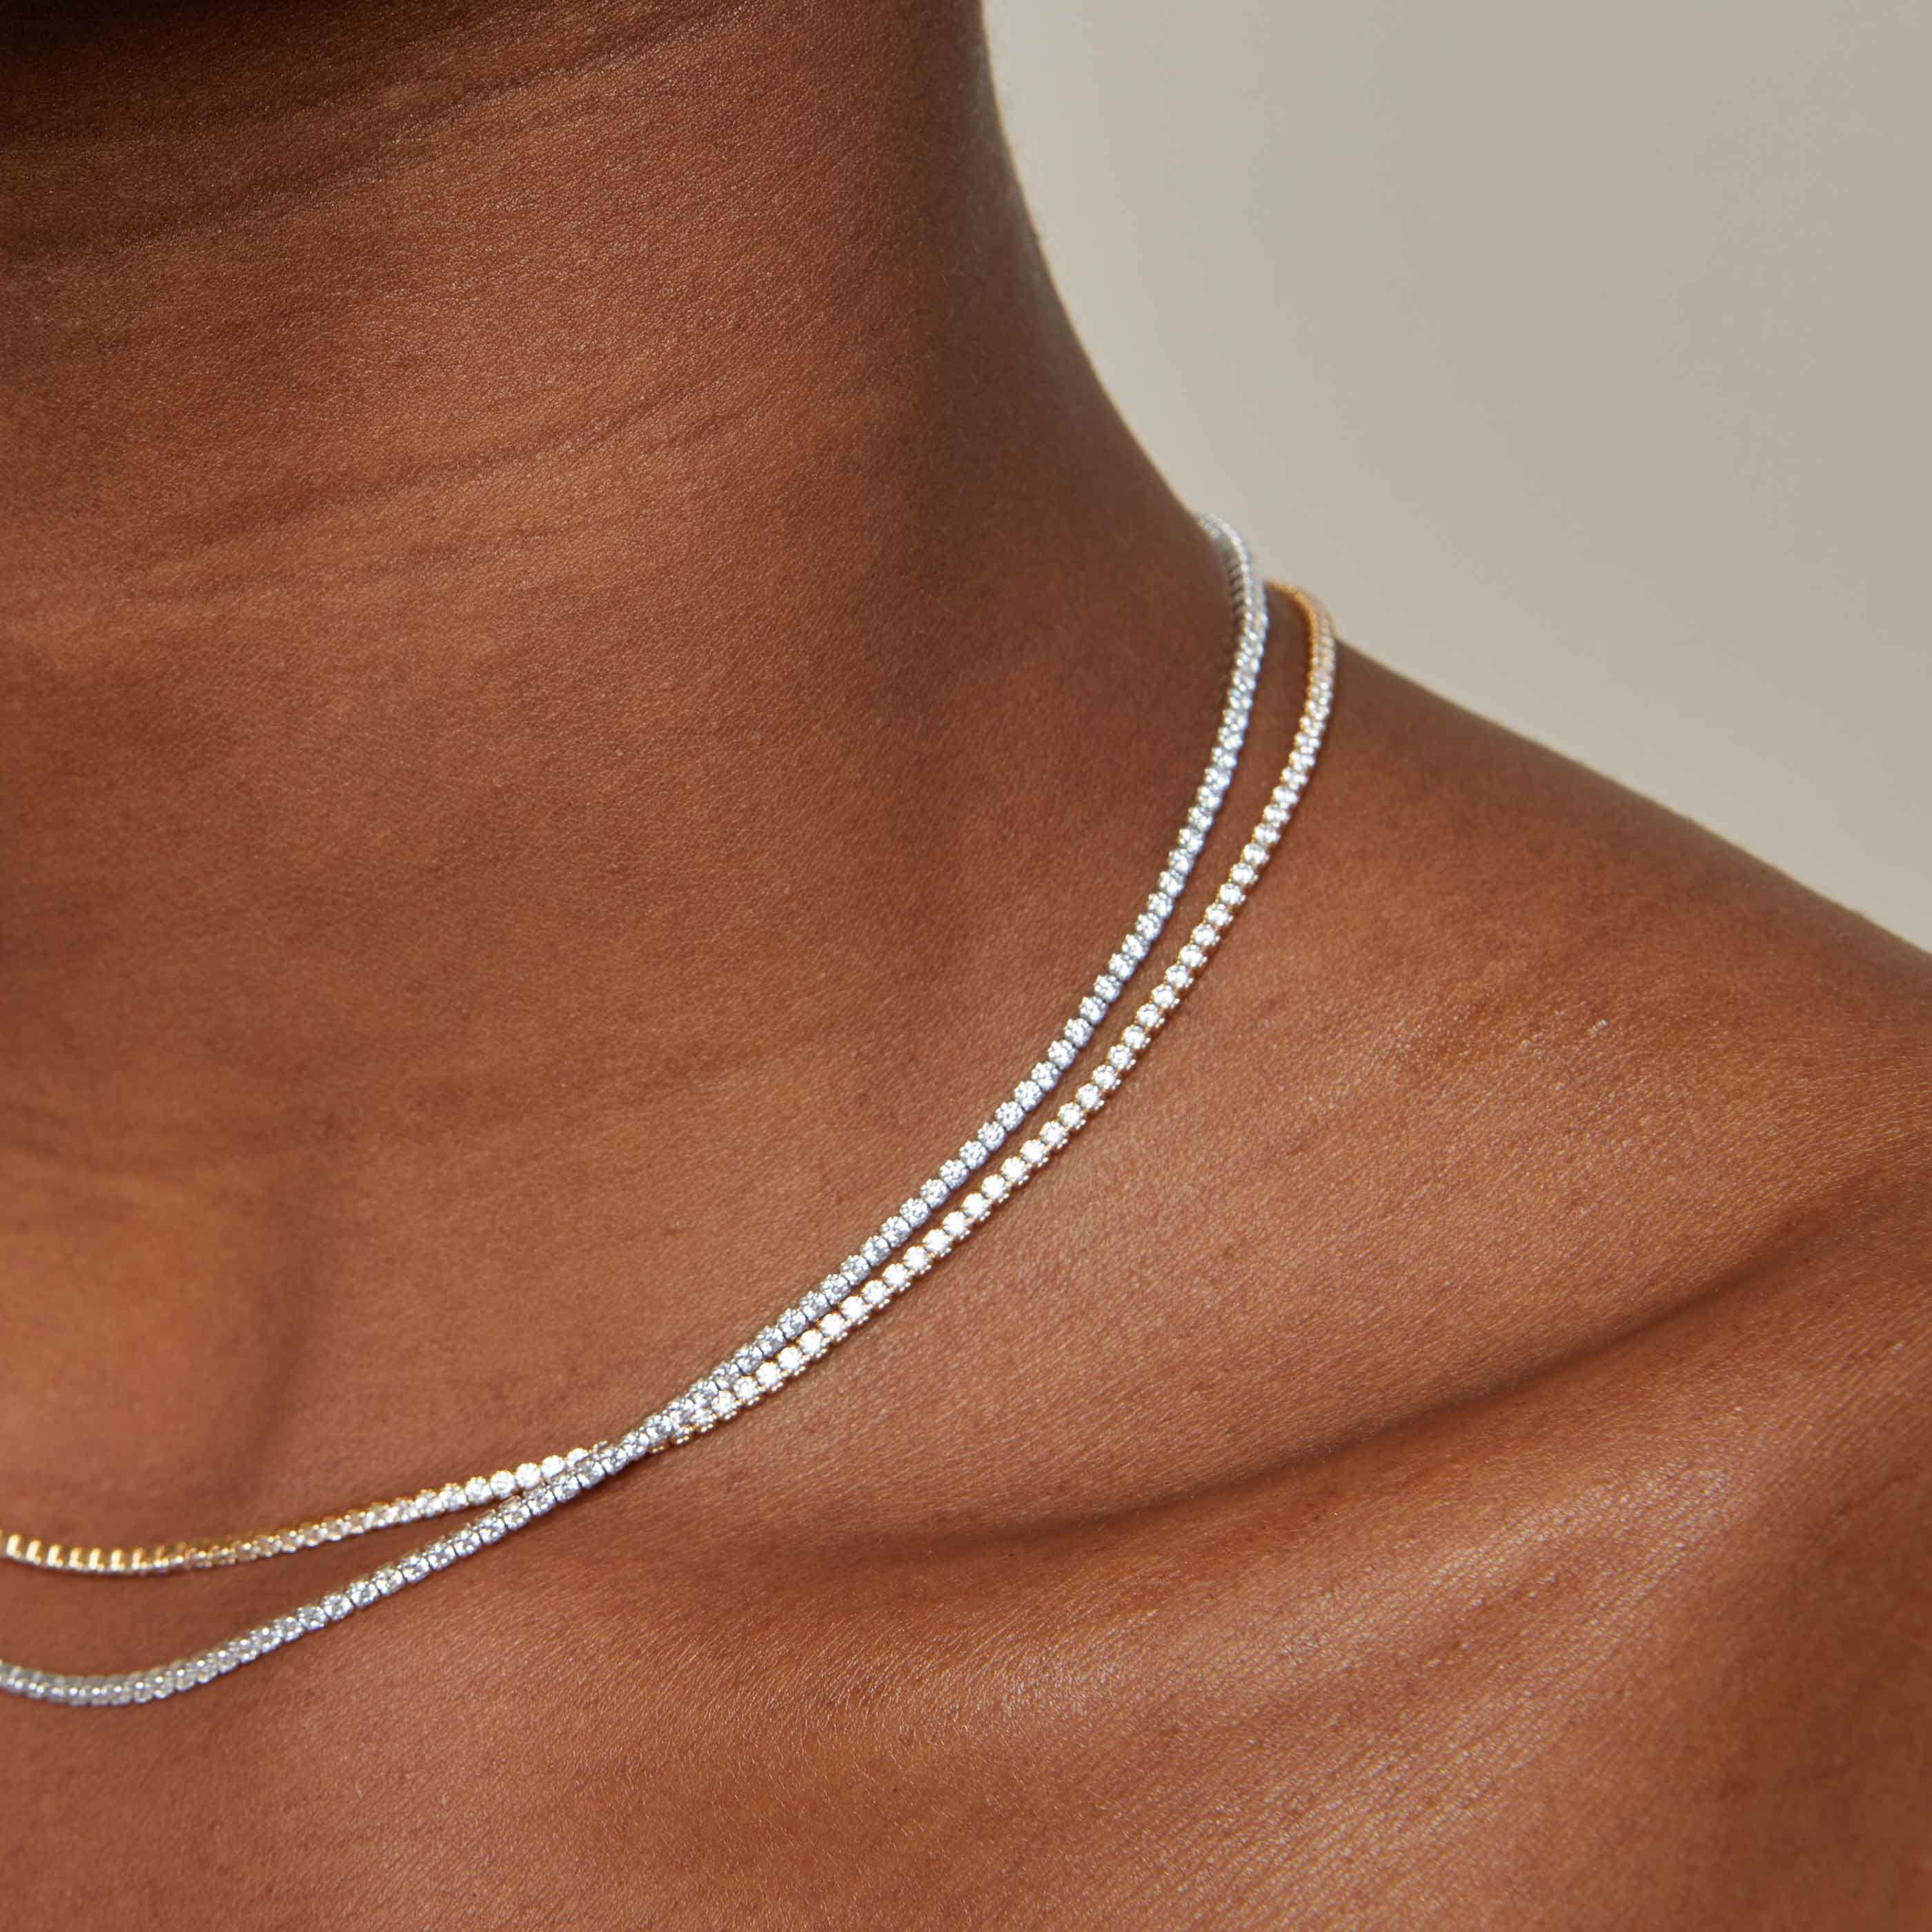 Tennis Chain Necklace in Silver layered with Tennis Chain Necklace in Gold